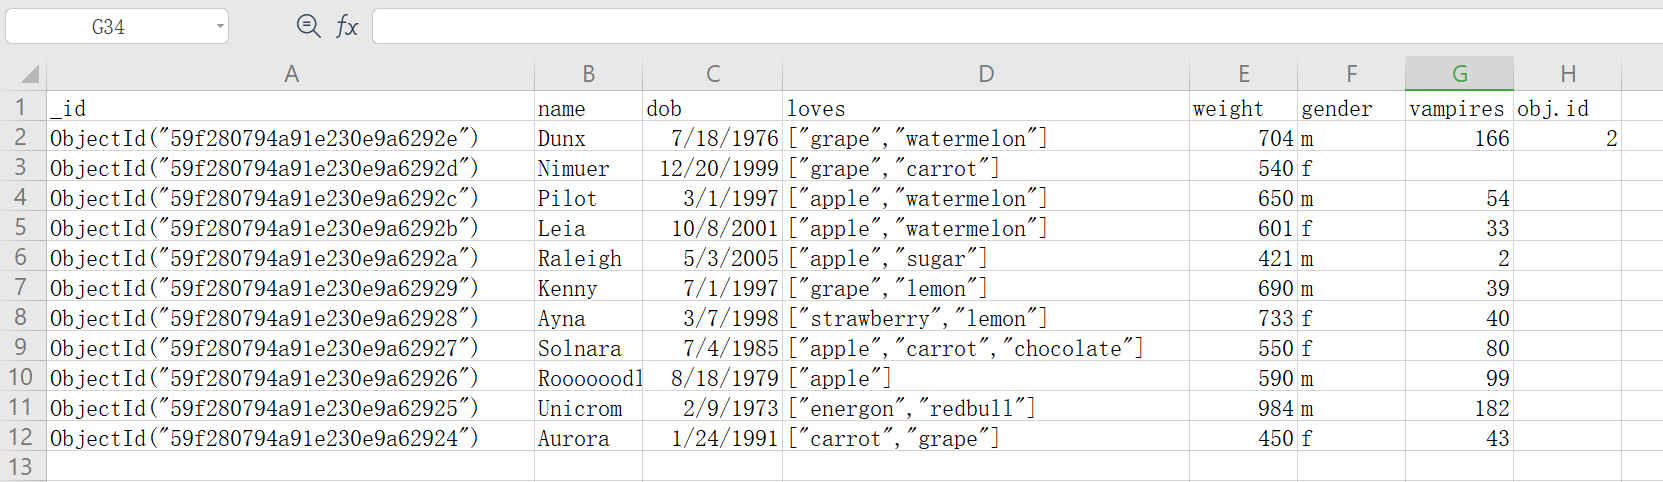 View as Spreadsheet in Excel